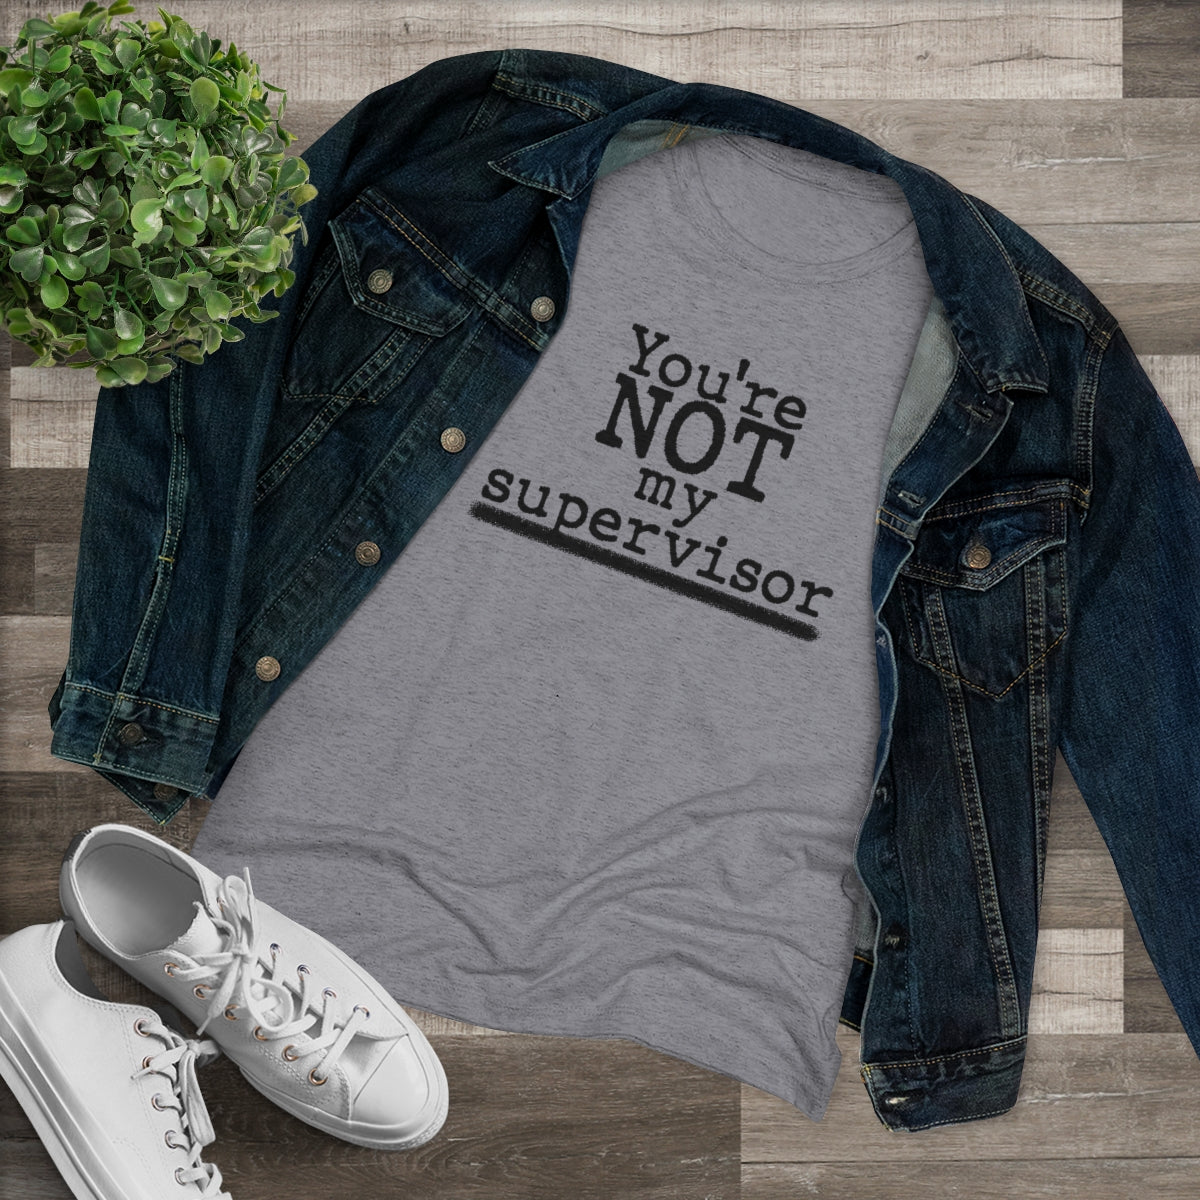 You're NOT my supervisor- Archer TV show theme- WomenBrainStorm Tees